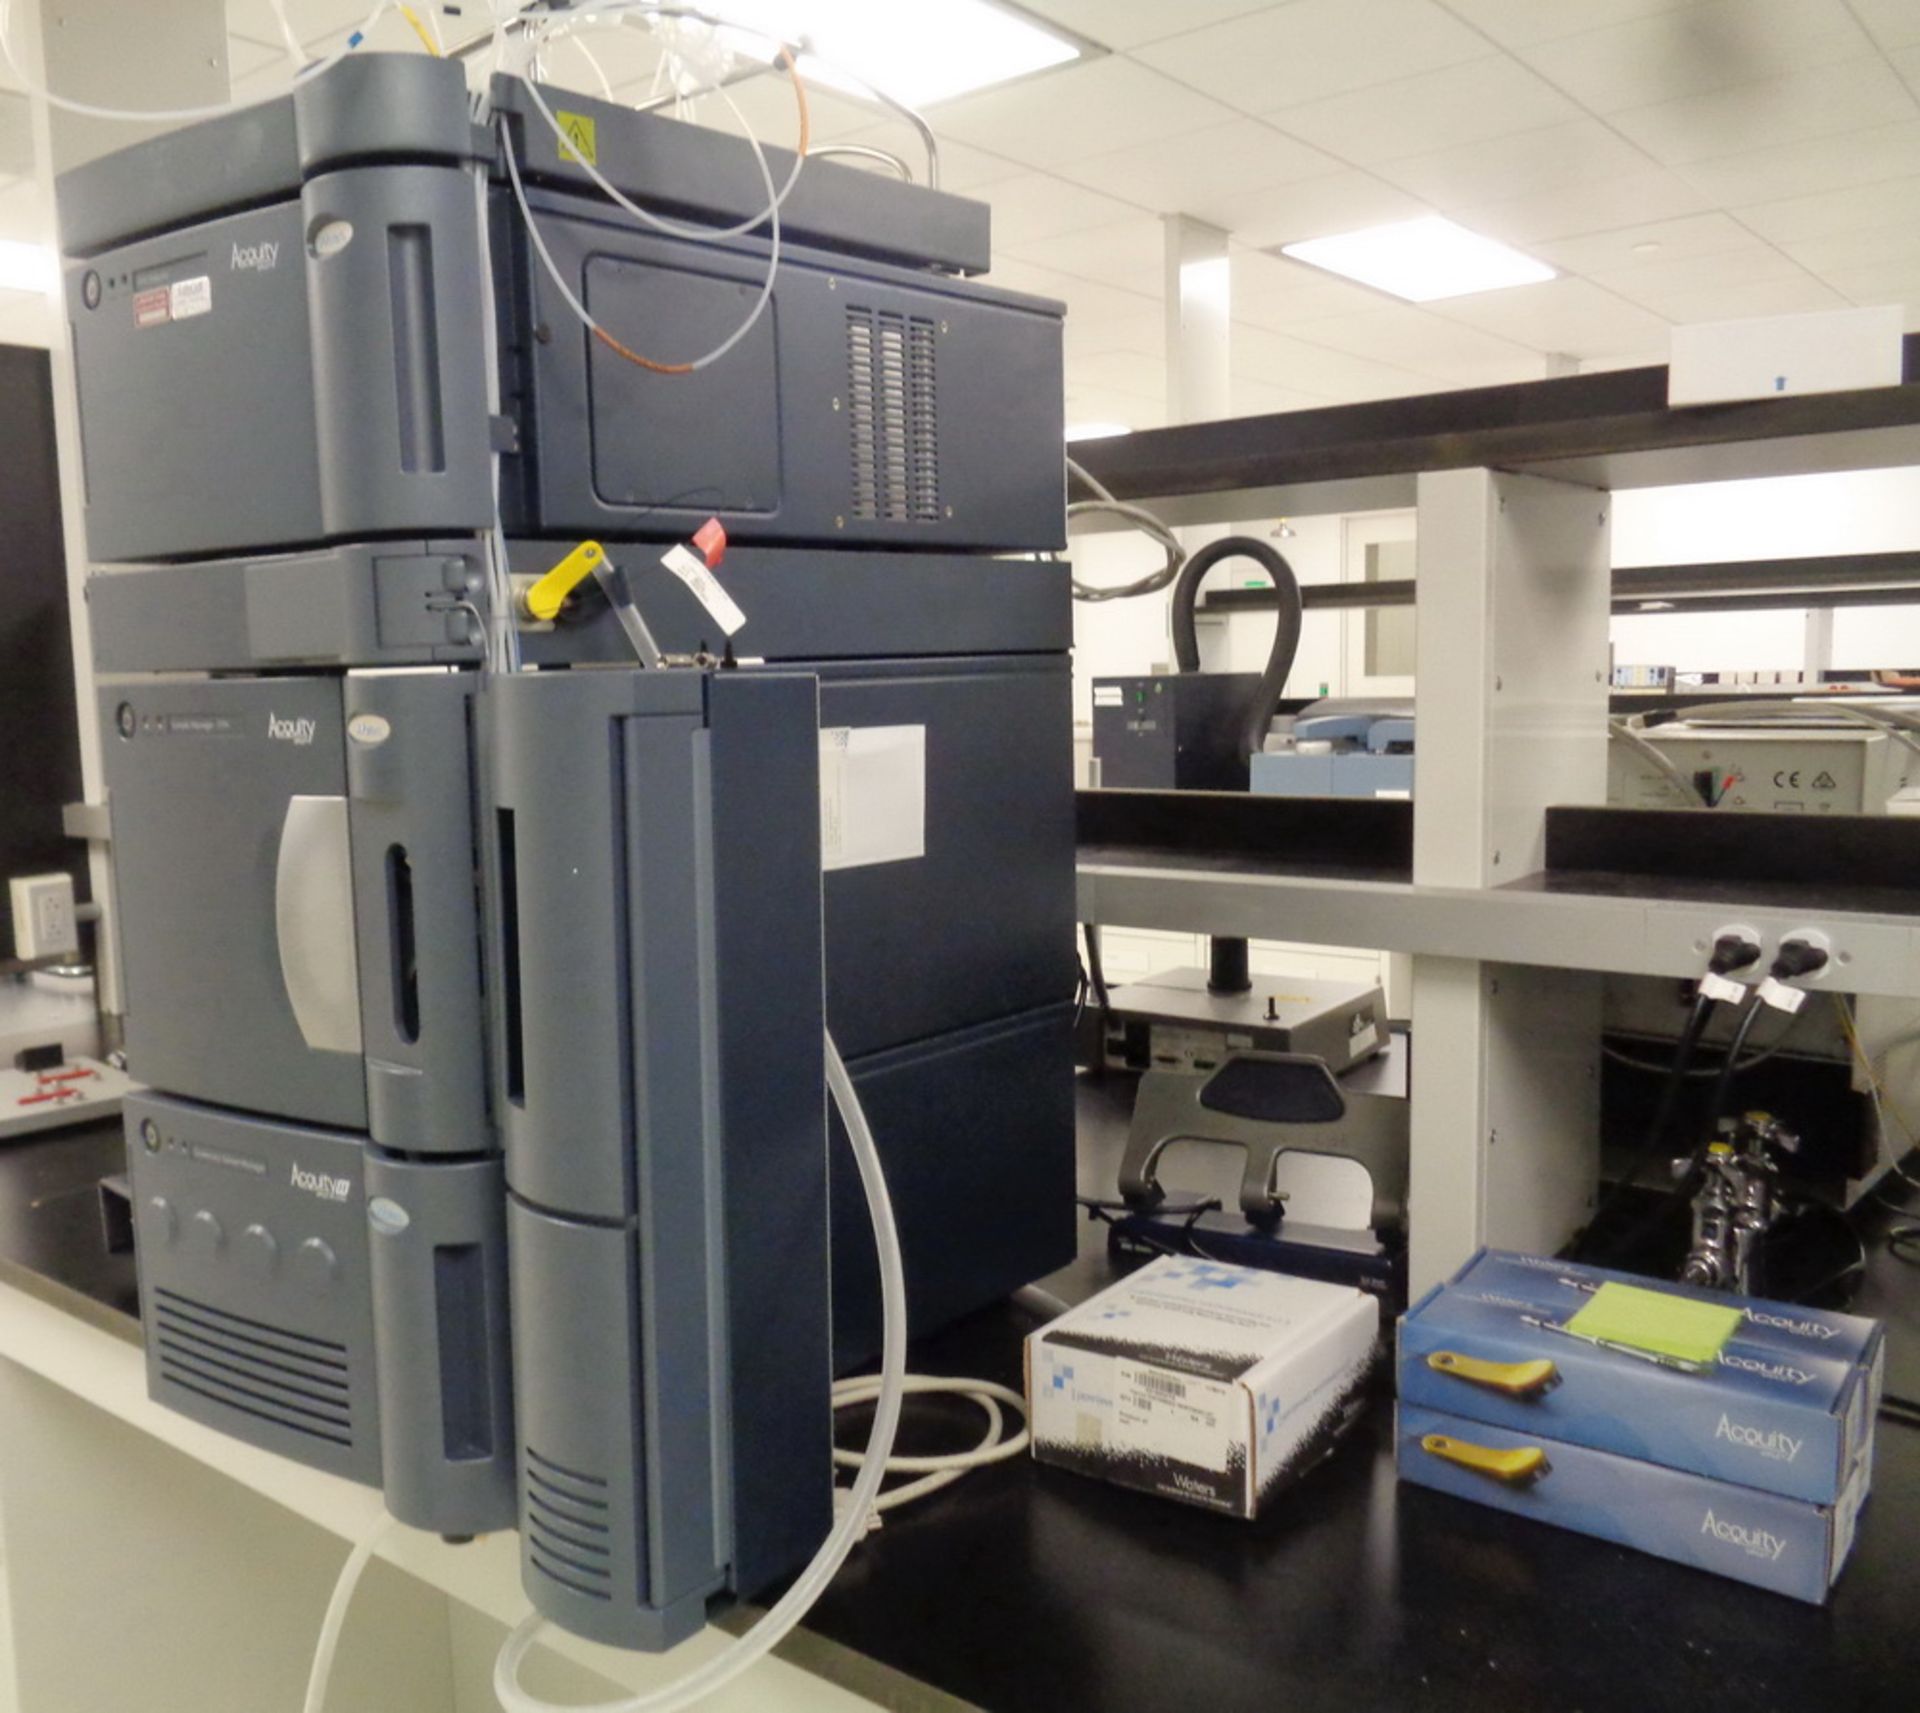 Waters Acquity 2 UPLC with PDA Detector, Sample Mgr-FTN, Quaternary Solvent Mgr, and Column Heater - Image 2 of 7